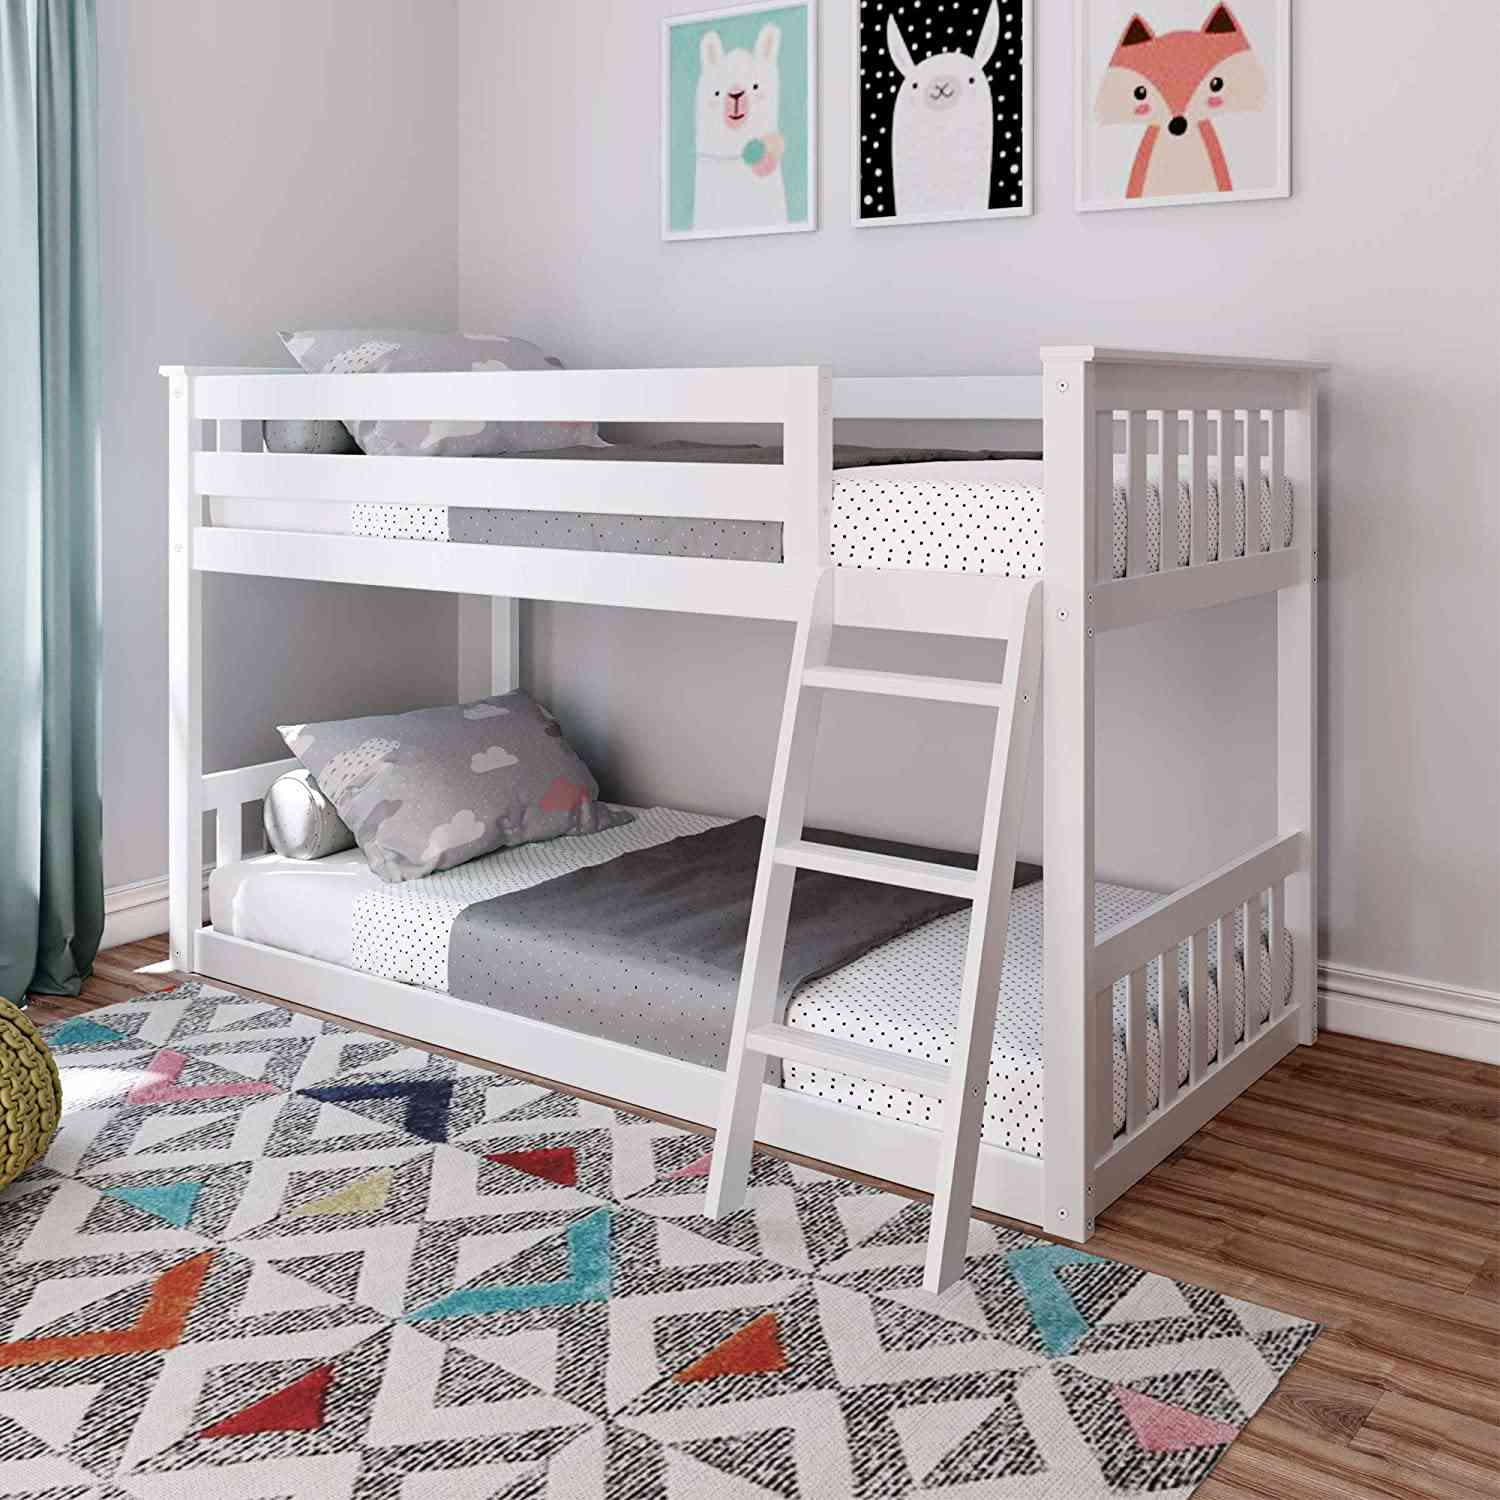 wooden beds for kids